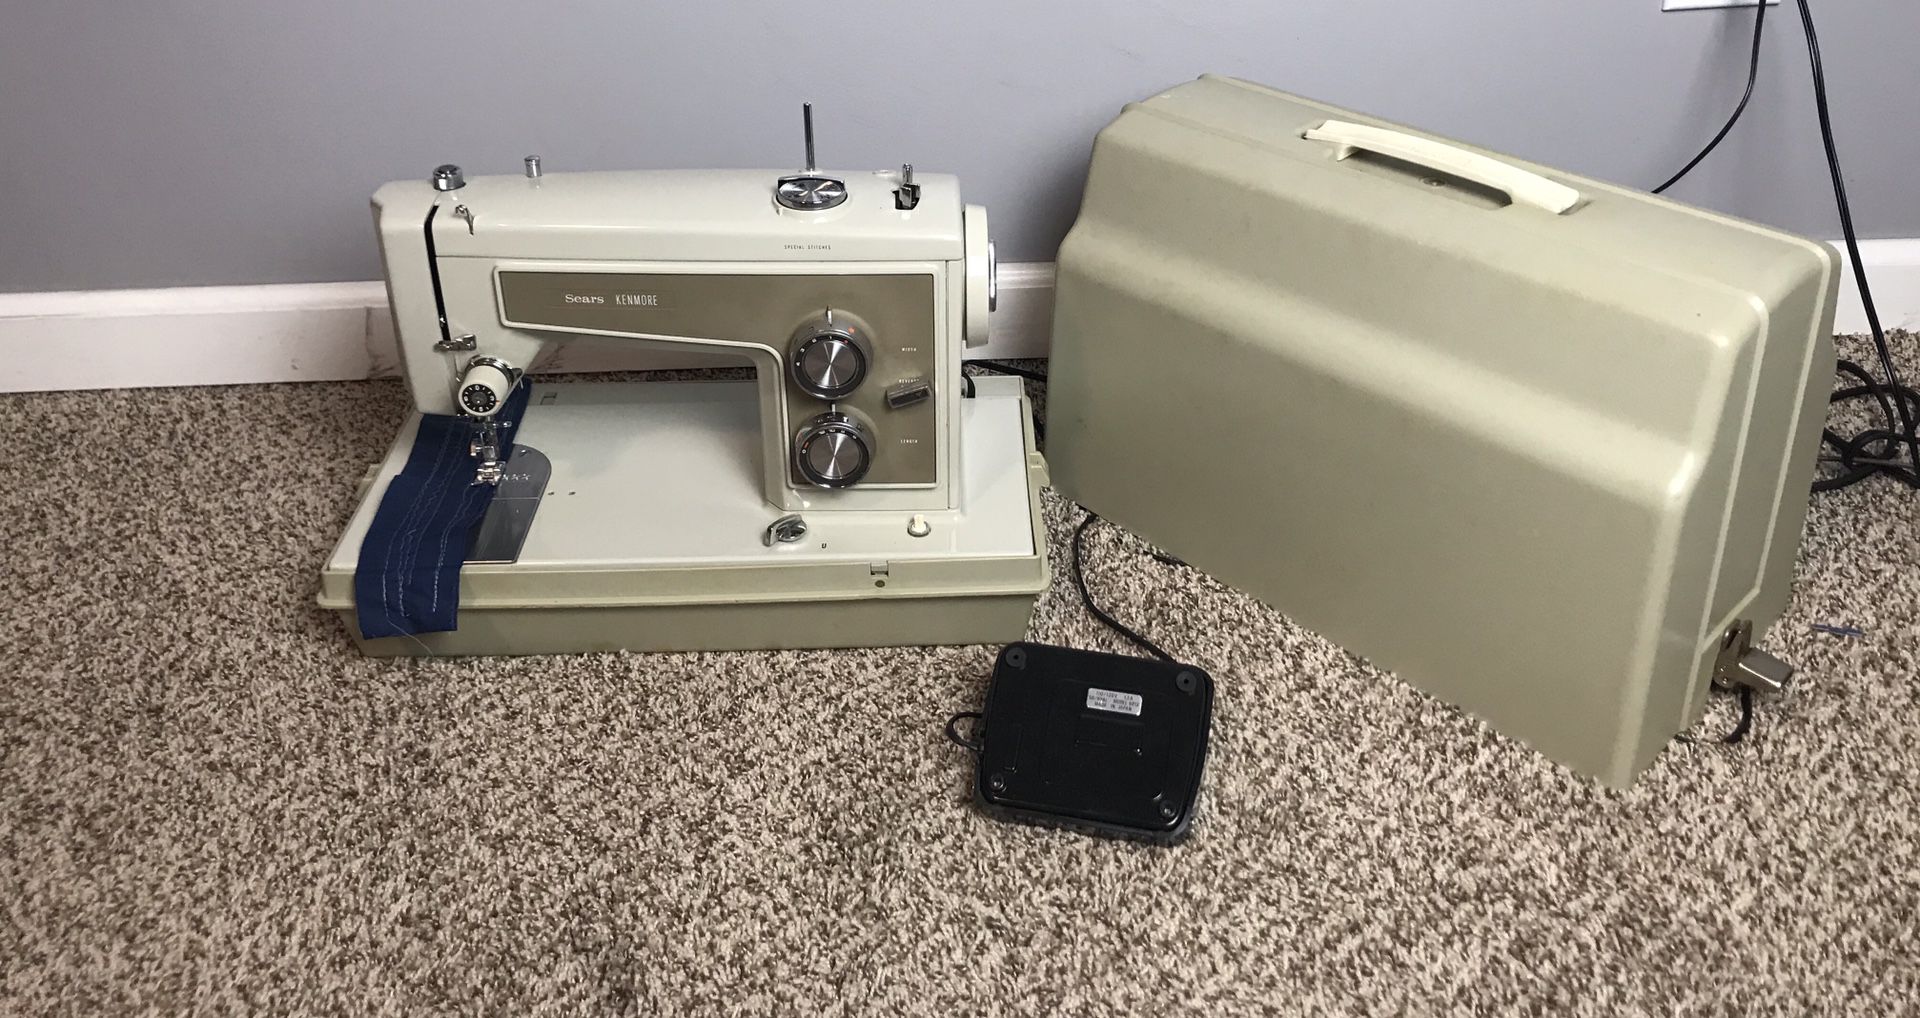 Vintage Sears Kenmore Zig Zag Sewing Machine Model 158.13571 w/Case TESTED- WORKS